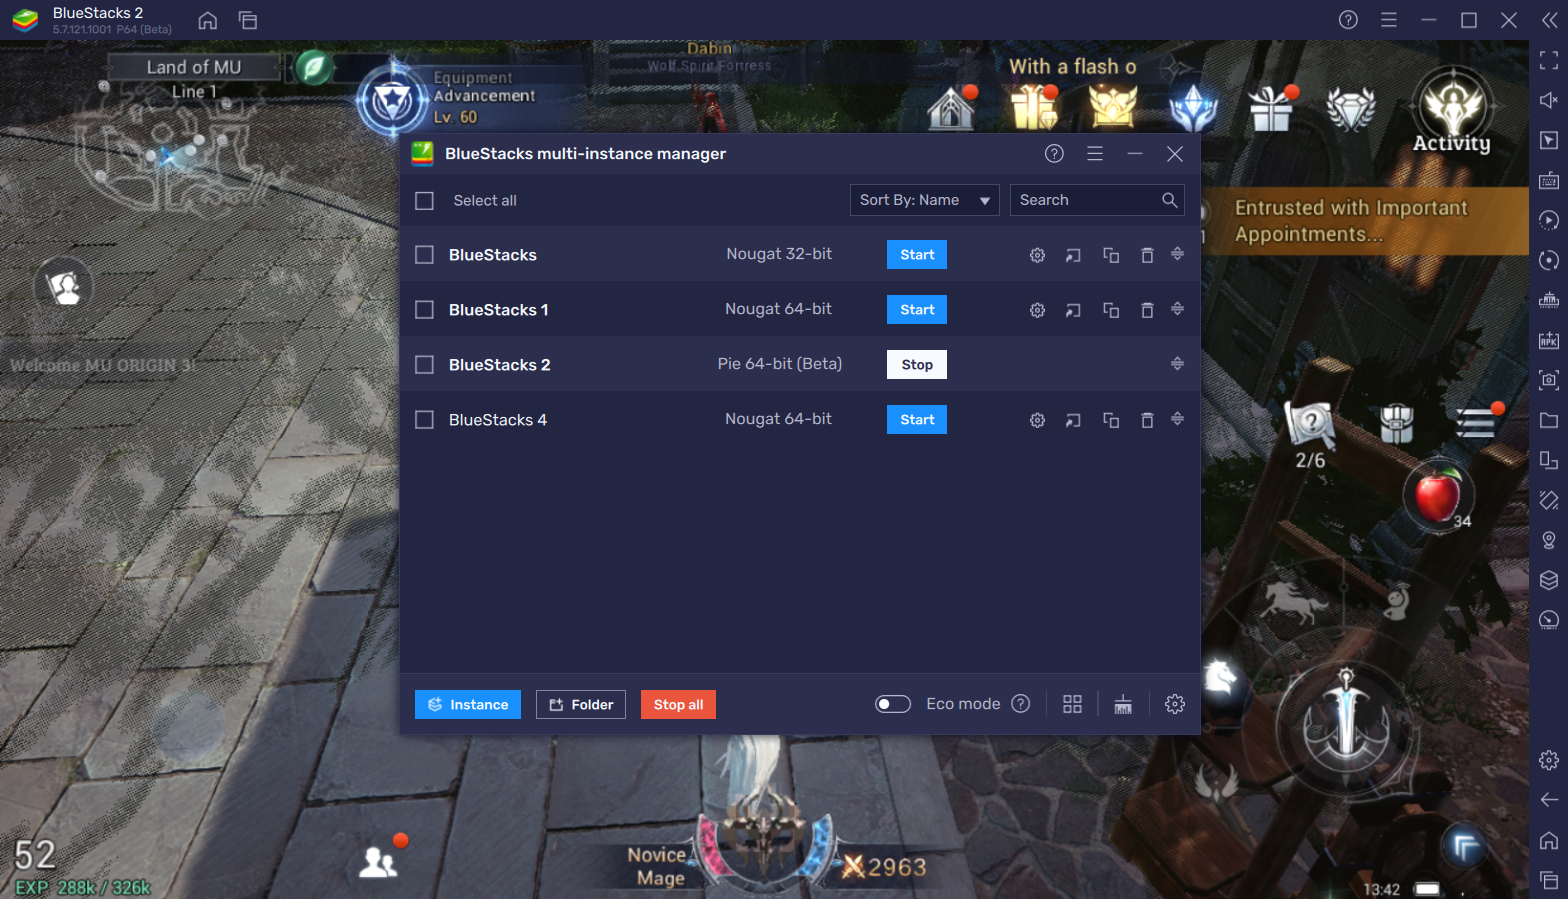 BlueStacks Features to Save Time and Increase Efficiency While Playing MU ORIGIN 3